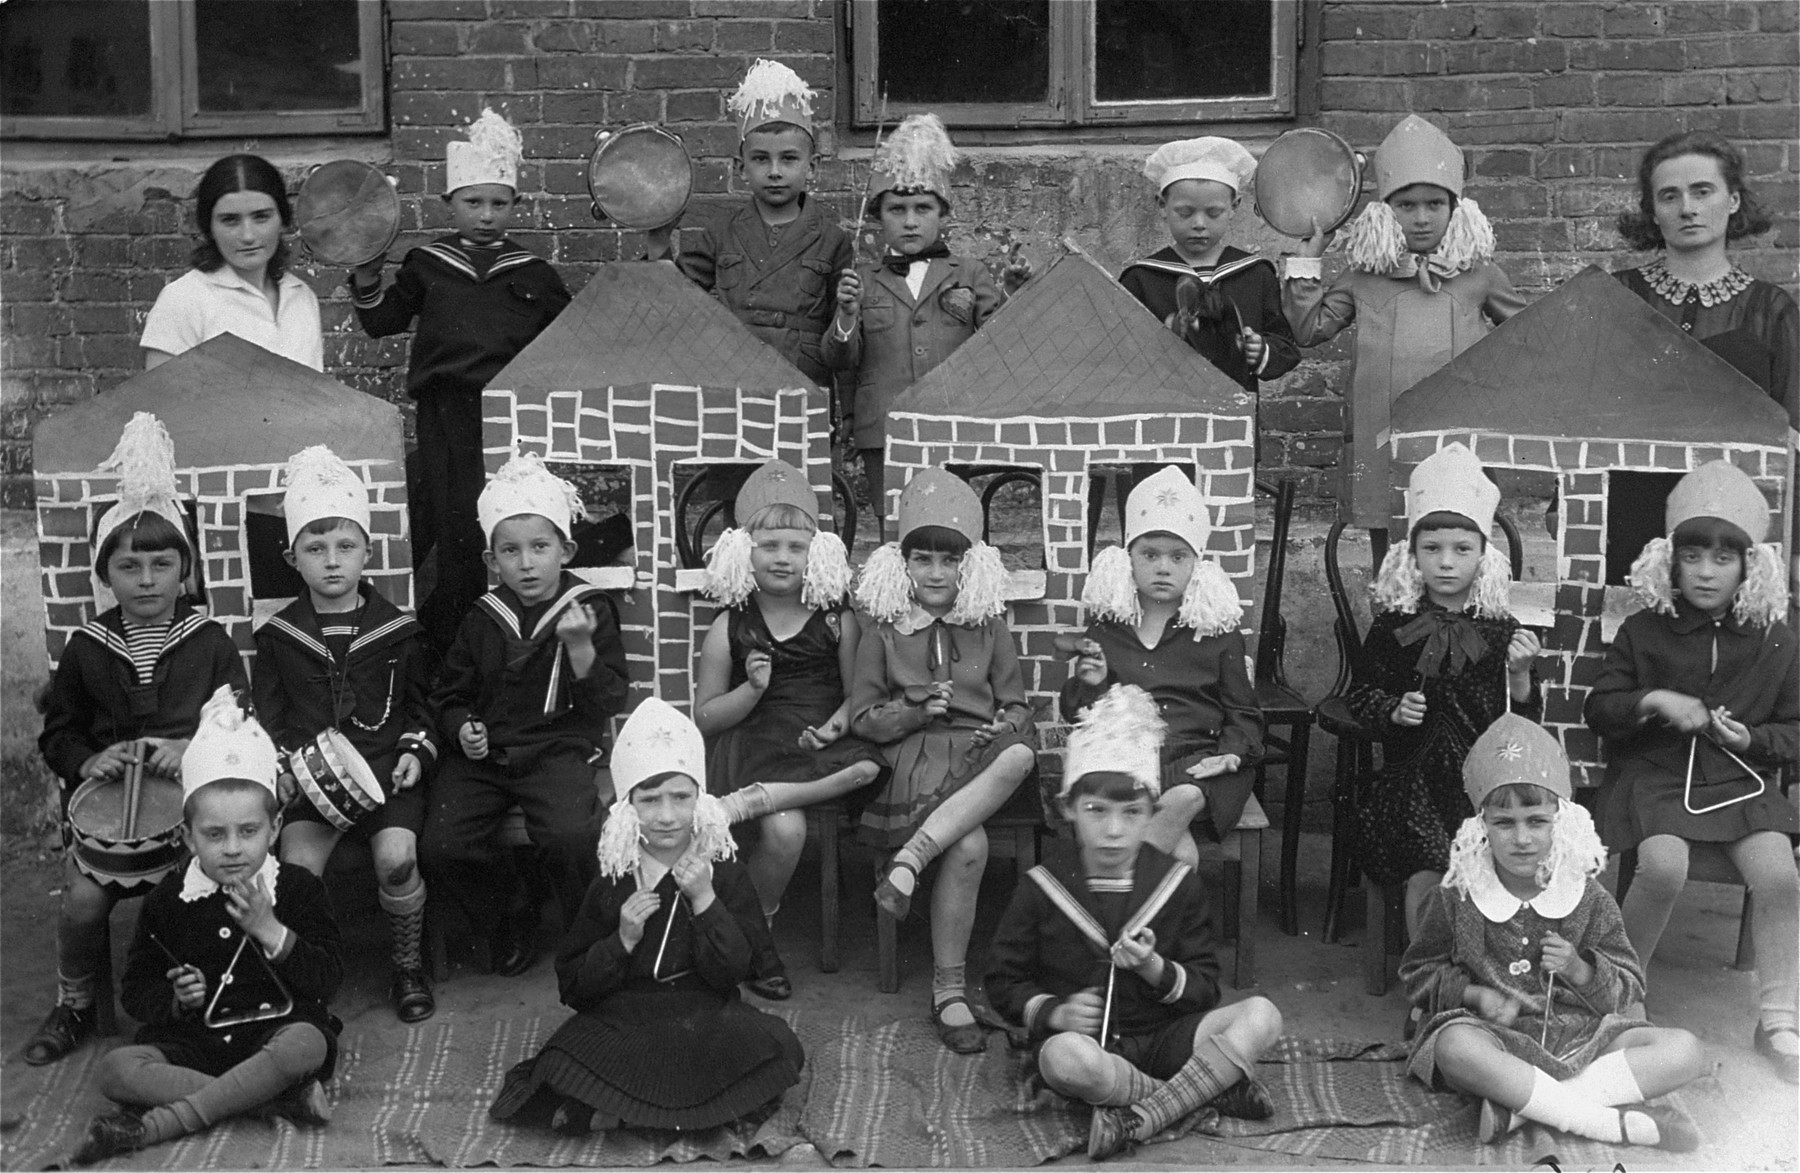 Kindergarten children at the Reali Hebrew gymnasium in Kovno perform in a school play.

Among those pictured is Hana Trozki (front row, right).